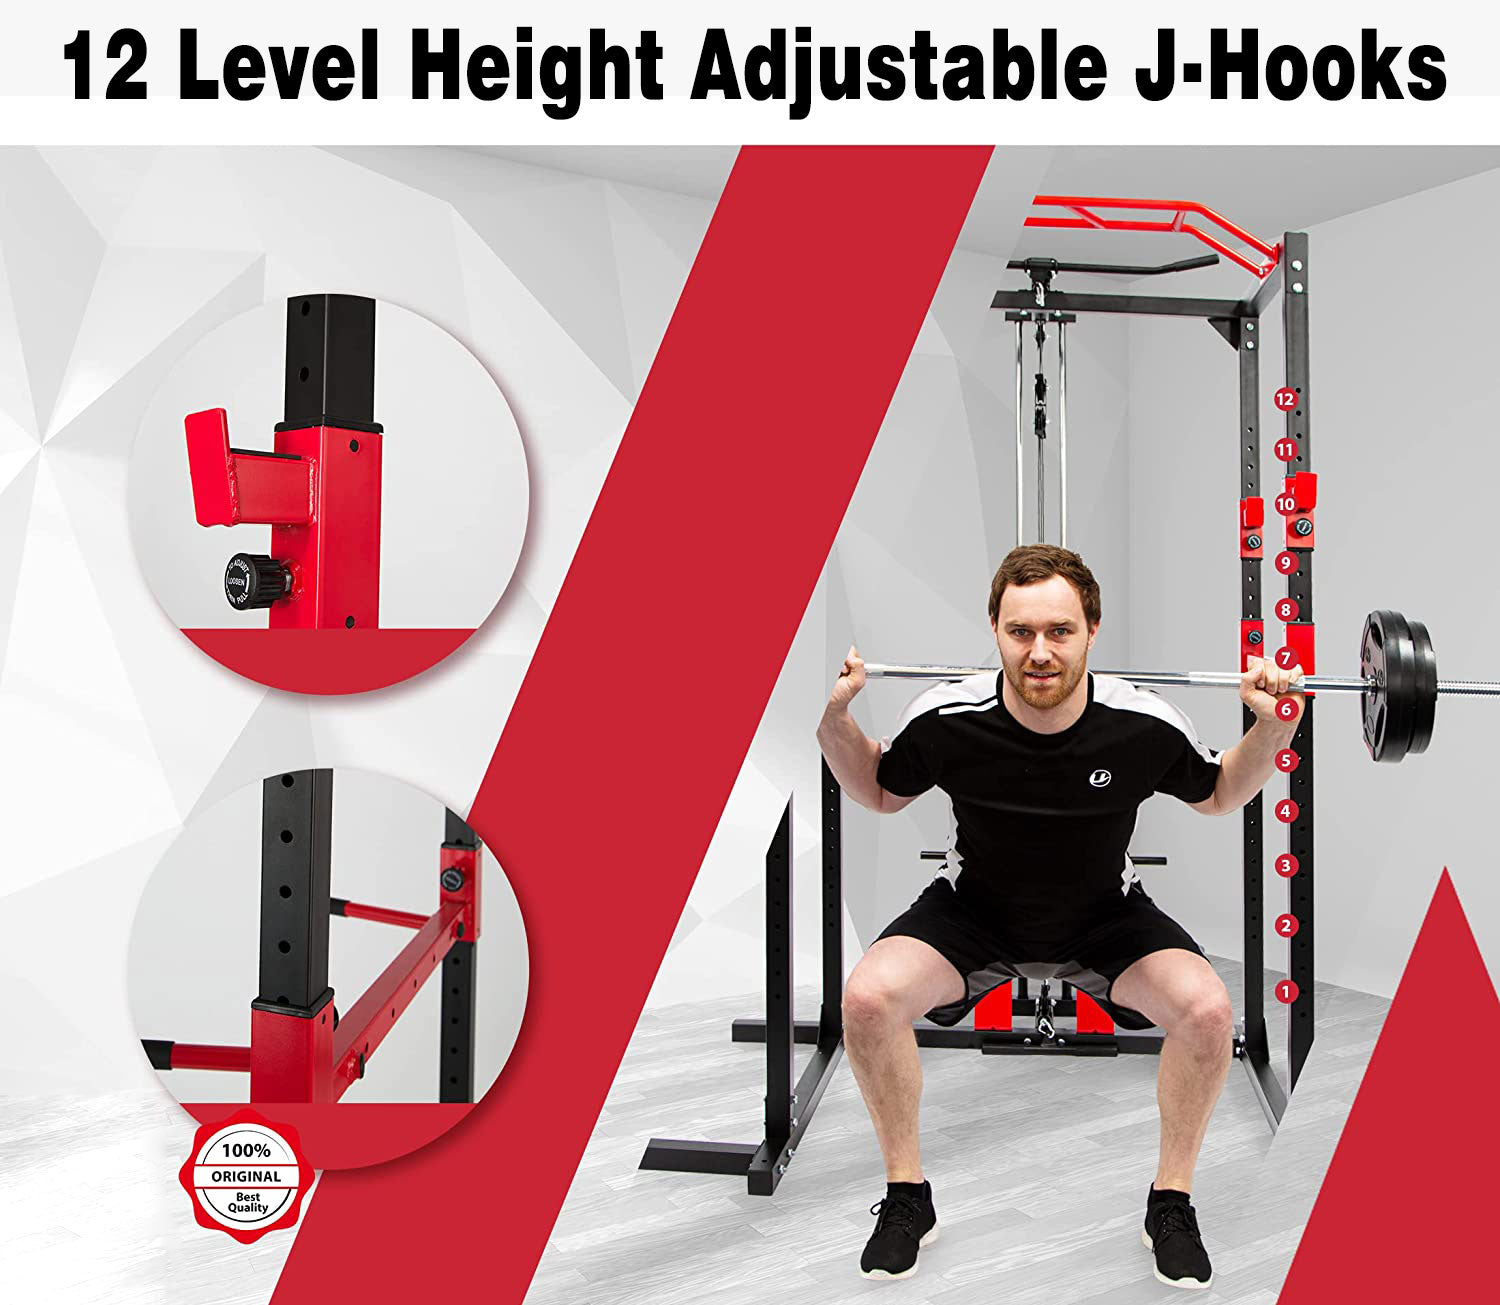 Power Cage Fitness Multifunctional Rack for Effective Full Body Workout